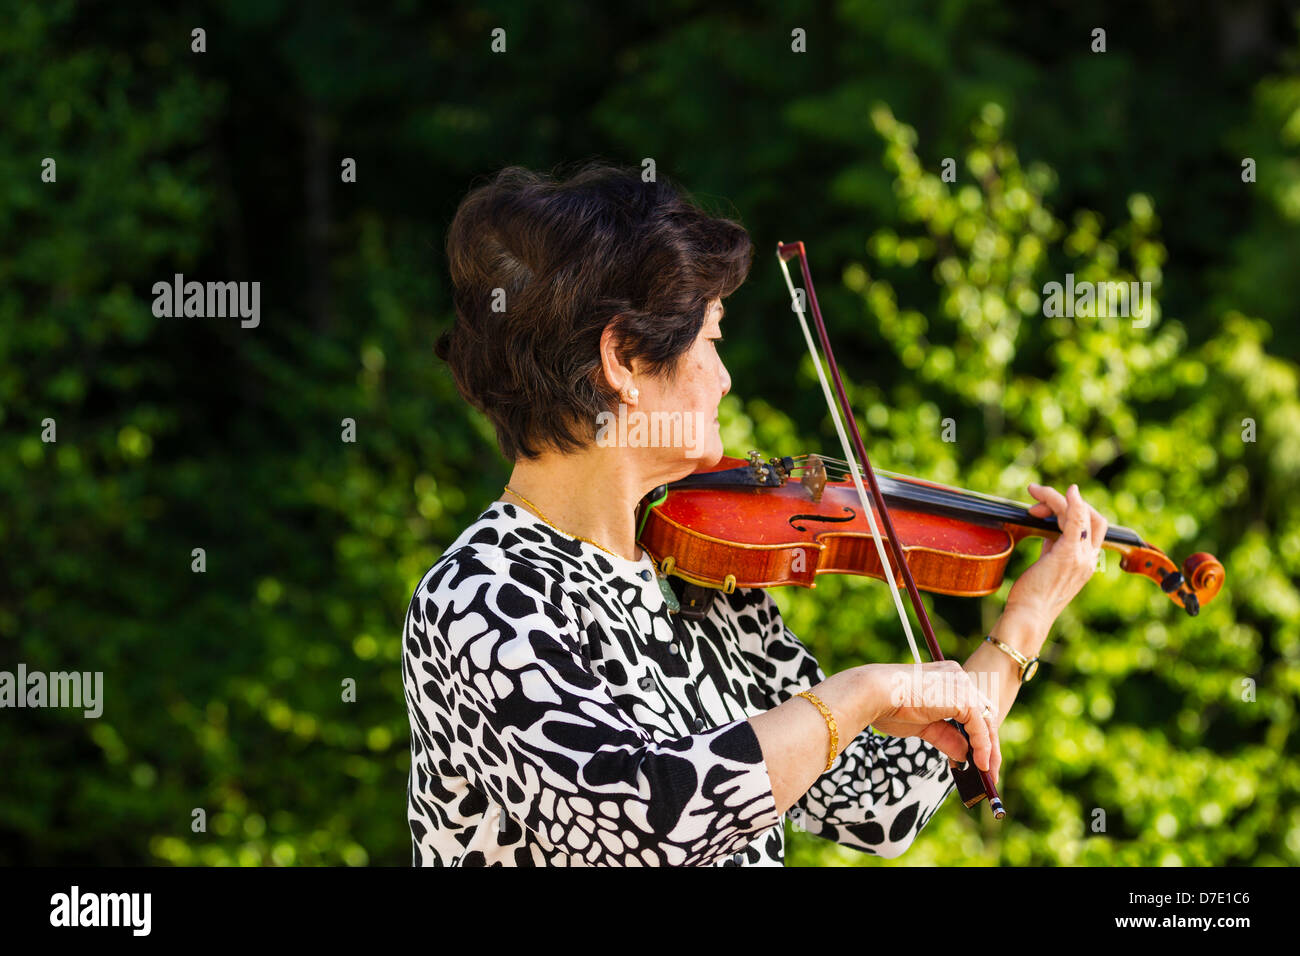 Horizontal photo of Senior Asian woman facing the forest while playing the violin outdoors with green trees in background Stock Photo